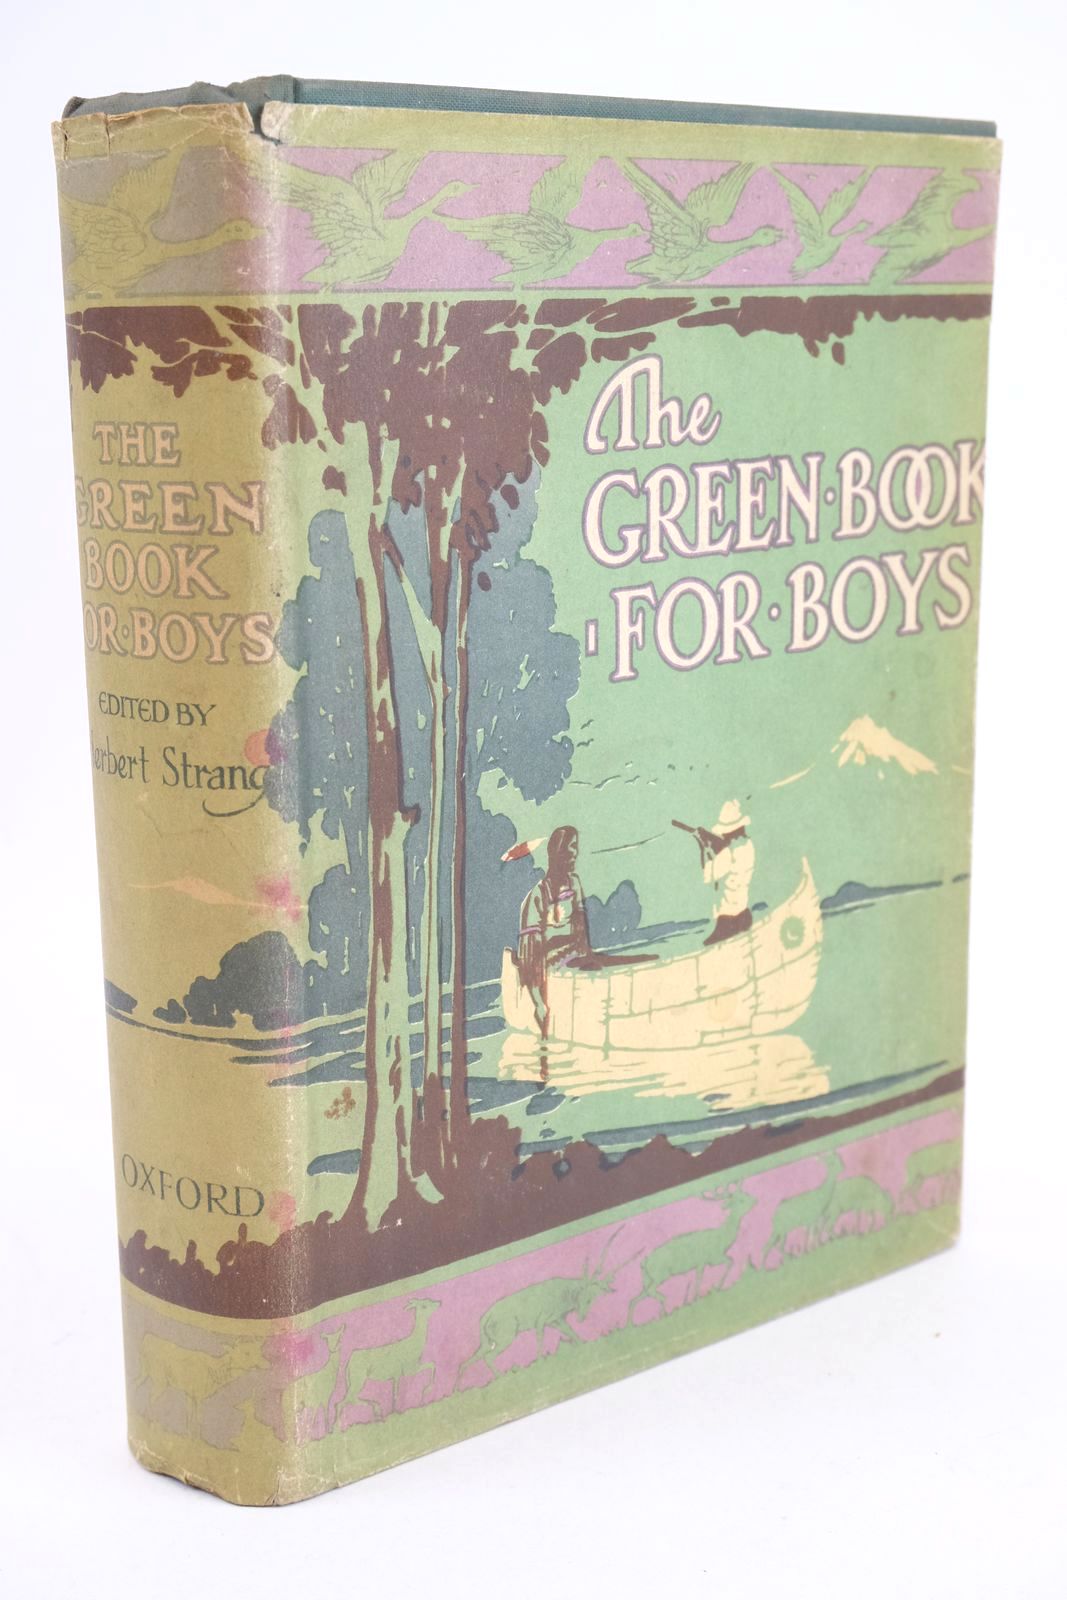 Photo of THE GREEN BOOK FOR BOYS written by Strang, Herbert Fenn, George Manville Step, Edward Henty, G.A. et al,  illustrated by Robinson, T.H. et al.,  published by Oxford University Press, Humphrey Milford (STOCK CODE: 1325523)  for sale by Stella & Rose's Books